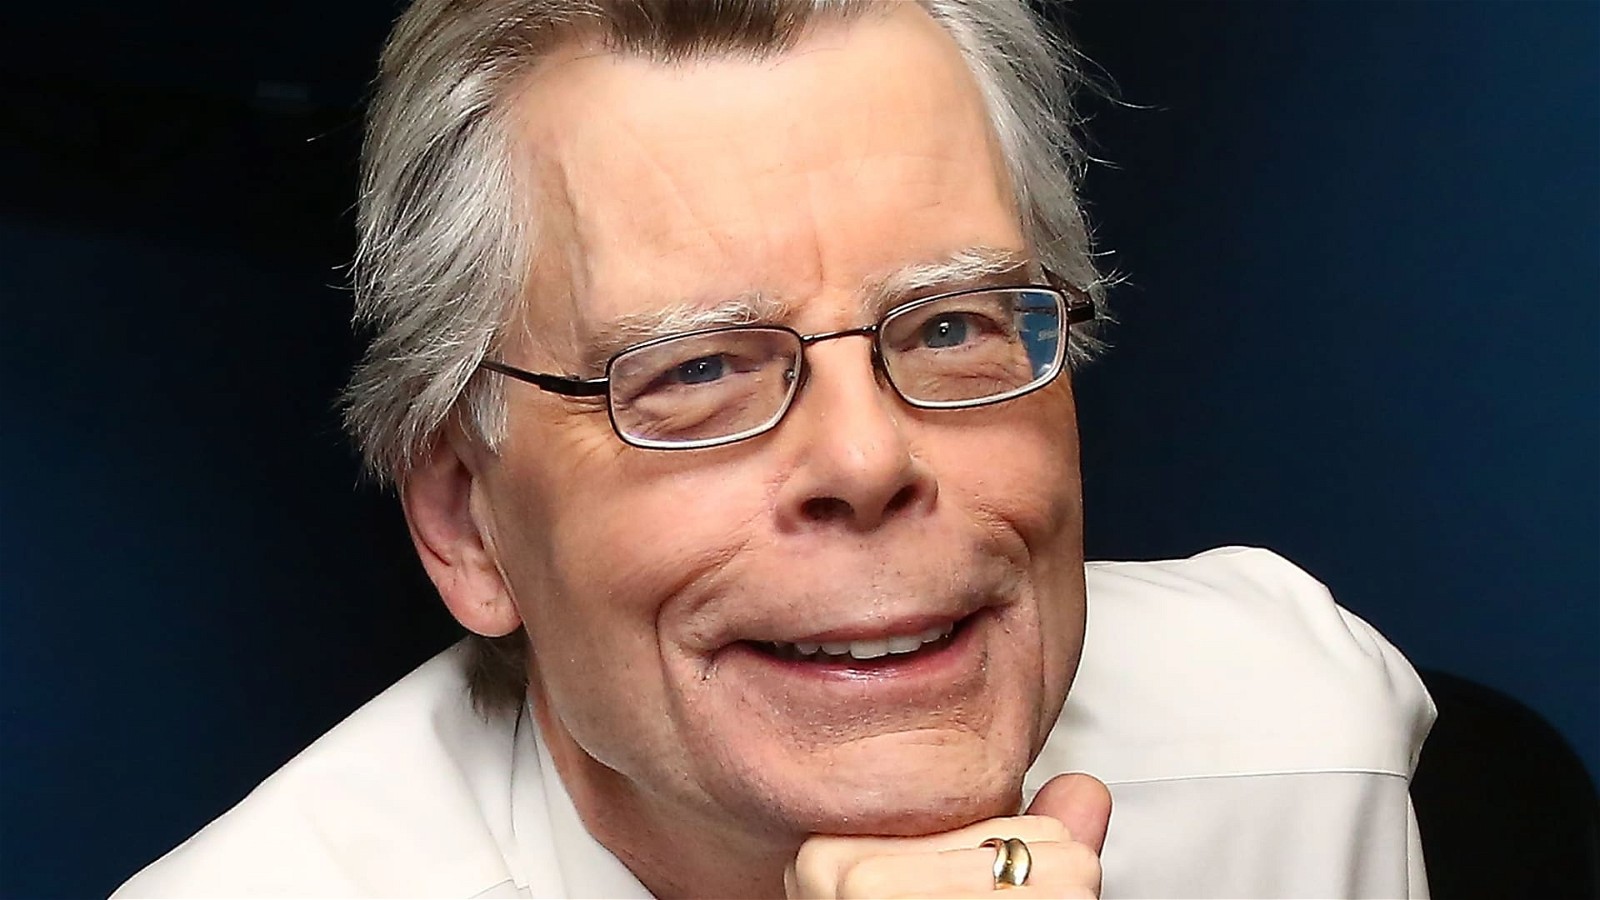 Stephen King is the author of The Shining, Doctor Sleep, and It.